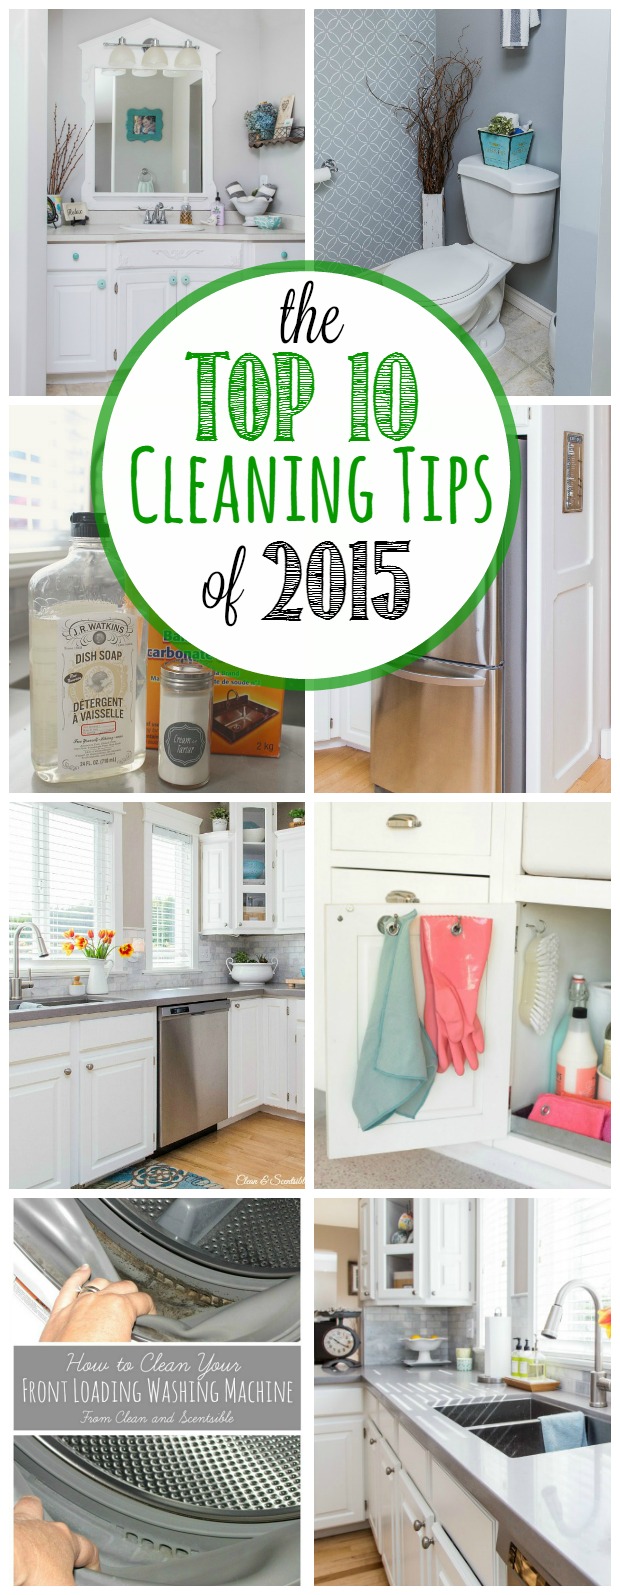 The best cleaning tips from 2015 - tons of great green cleaning ideas and tricks to get your home cleaned from top to bottom. A must pin!